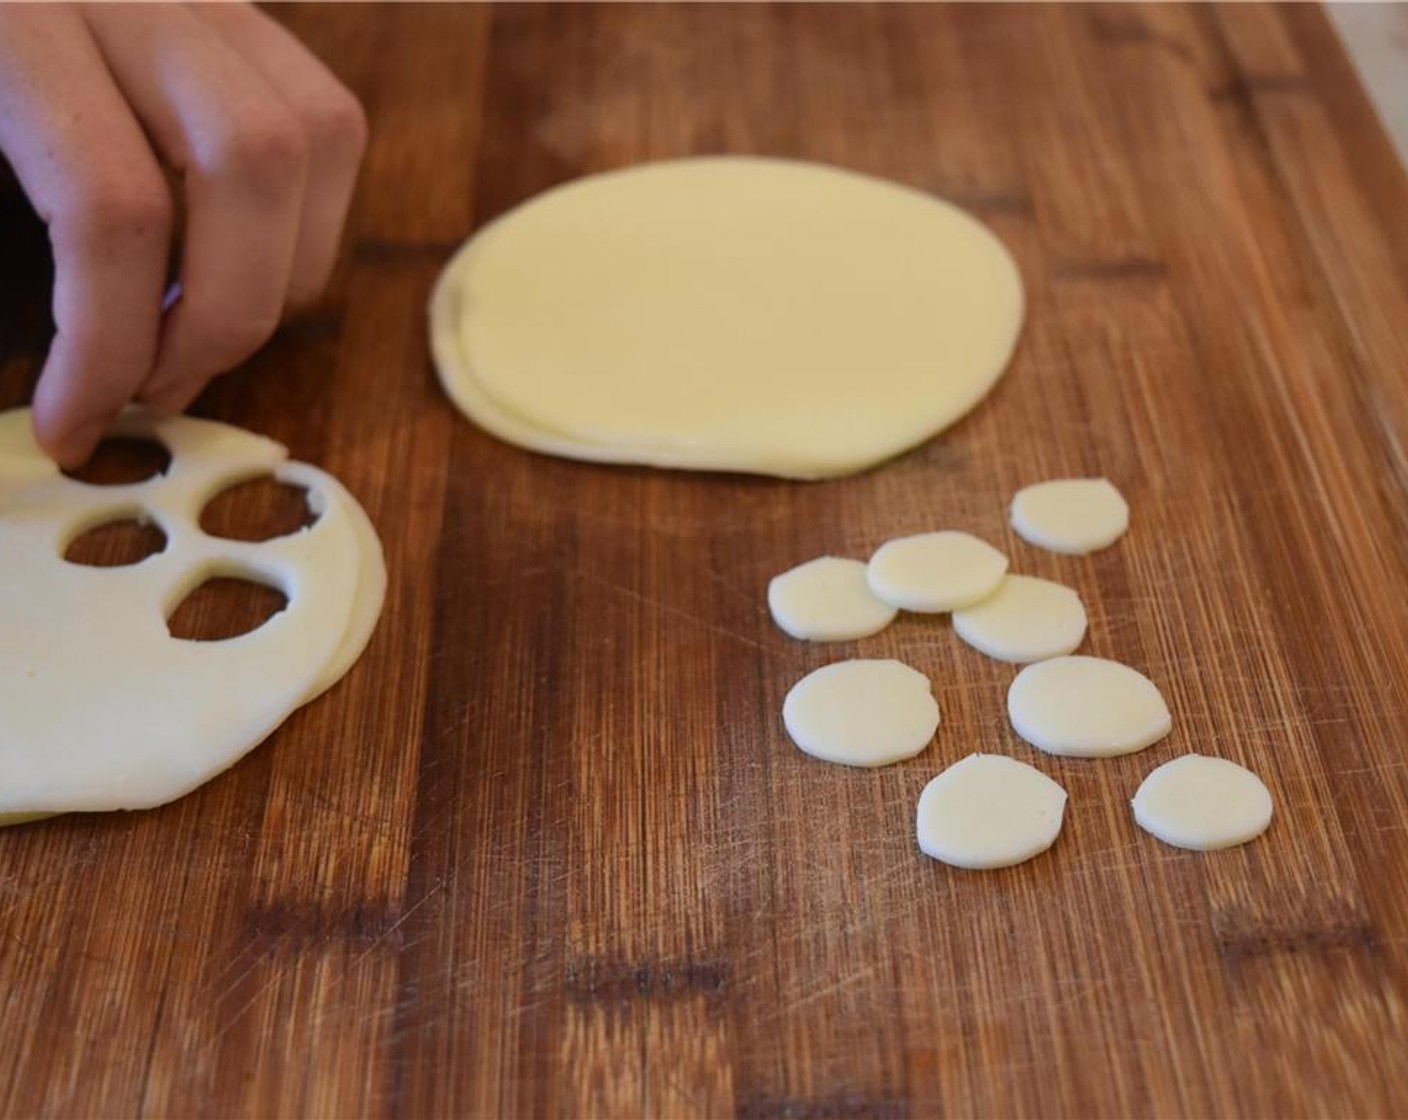 step 5 To make the“eyeballs" cut the Provolone Cheese Slice (1 cup) into 1-inch wide small circles.